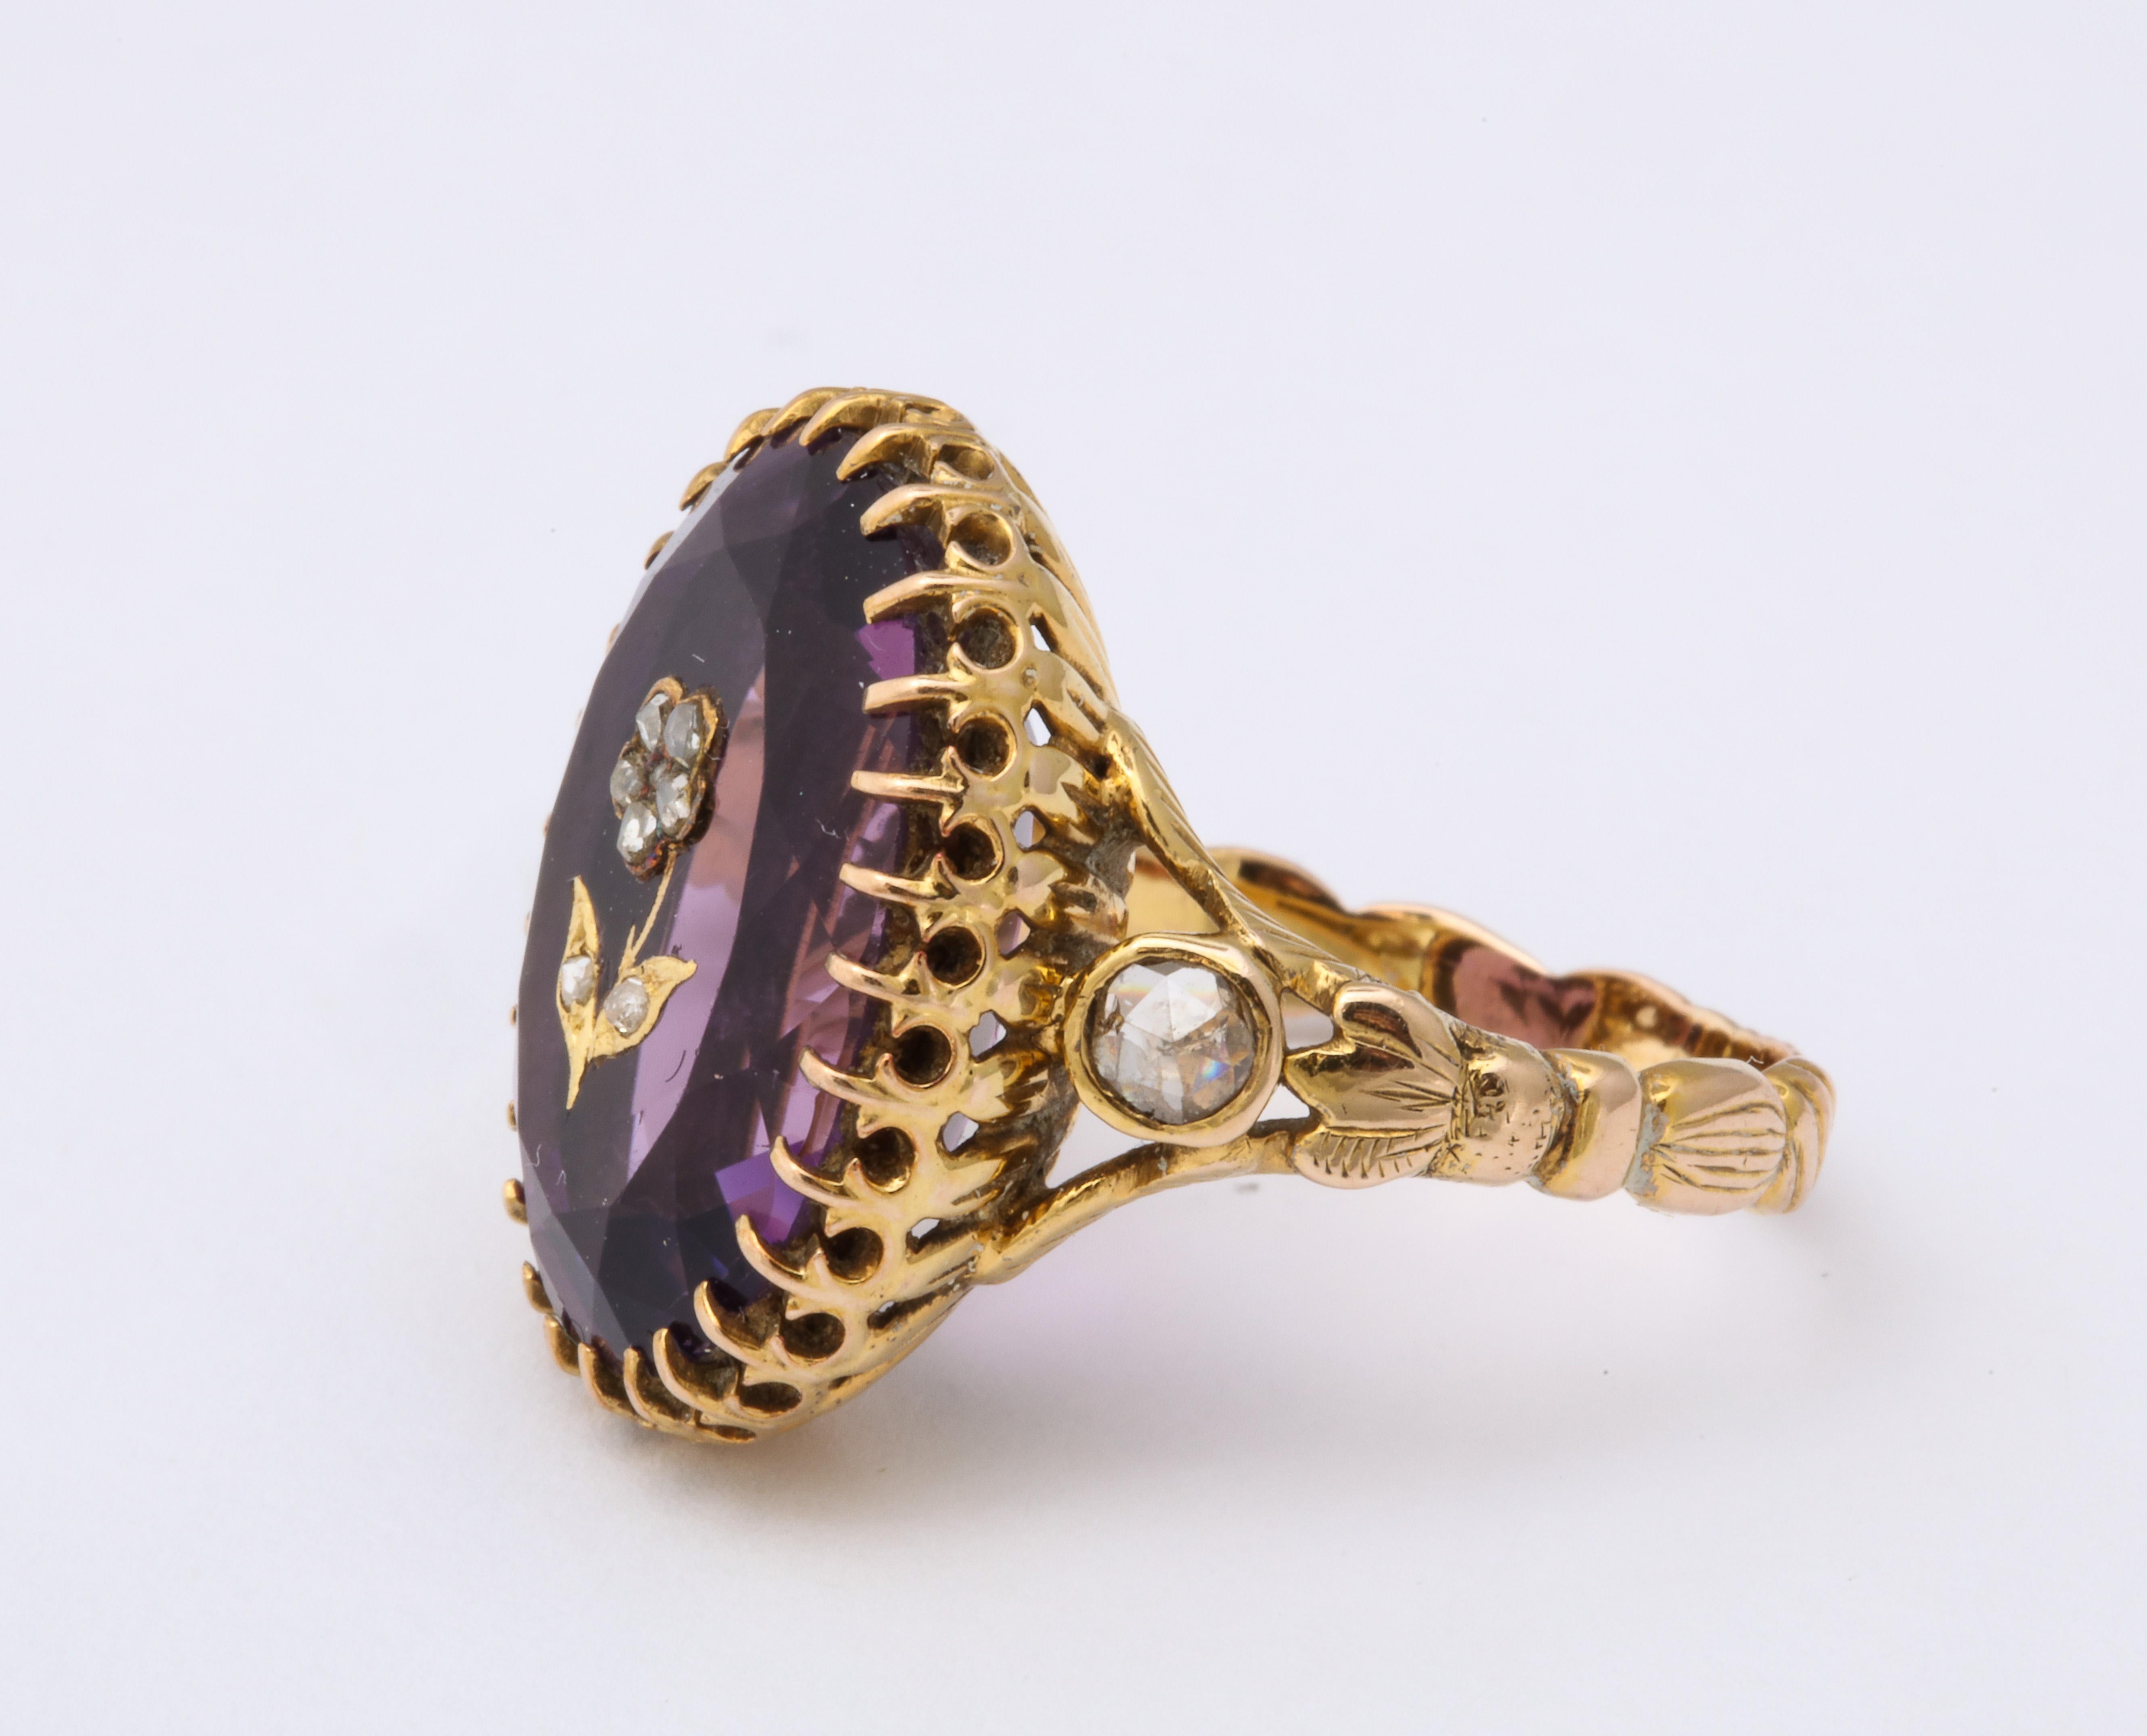 Late Victorian Antique Victorian 9.5 Carat Amethyst and Diamond Ring